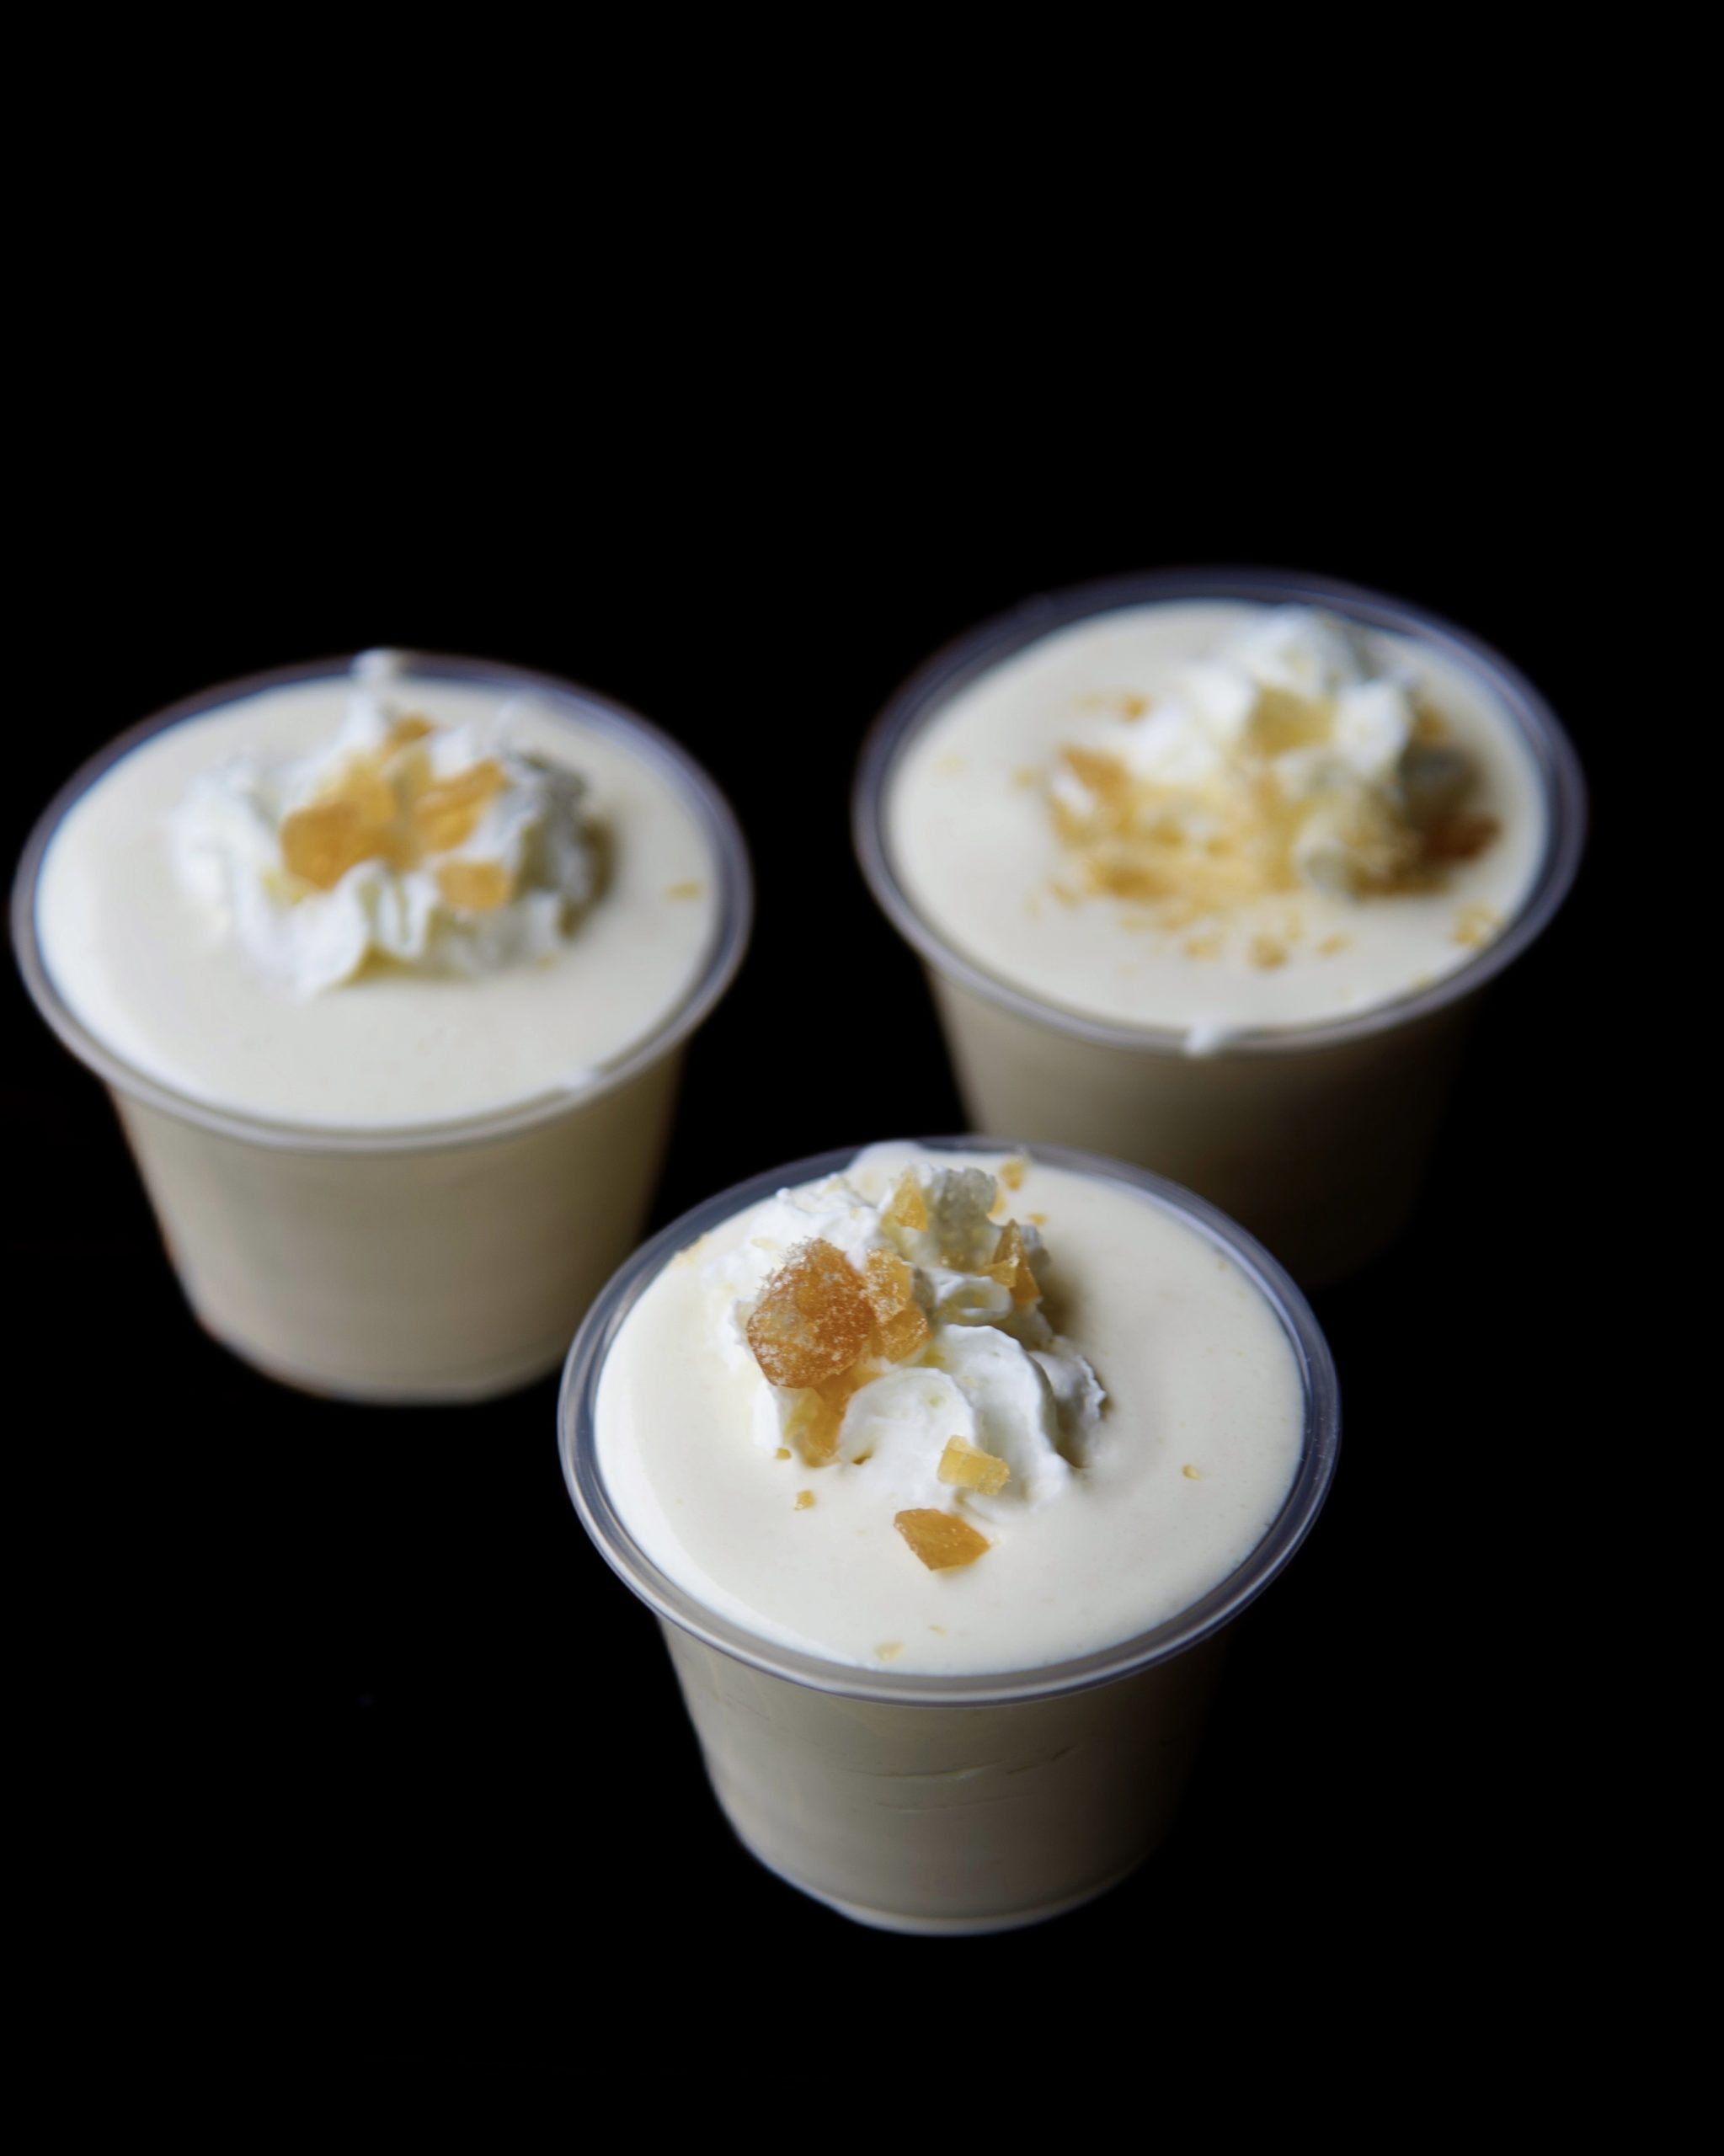 Three pudding shots with the center one being the focus. Shots are topped with whipped cream and crushed butter rum candies. 